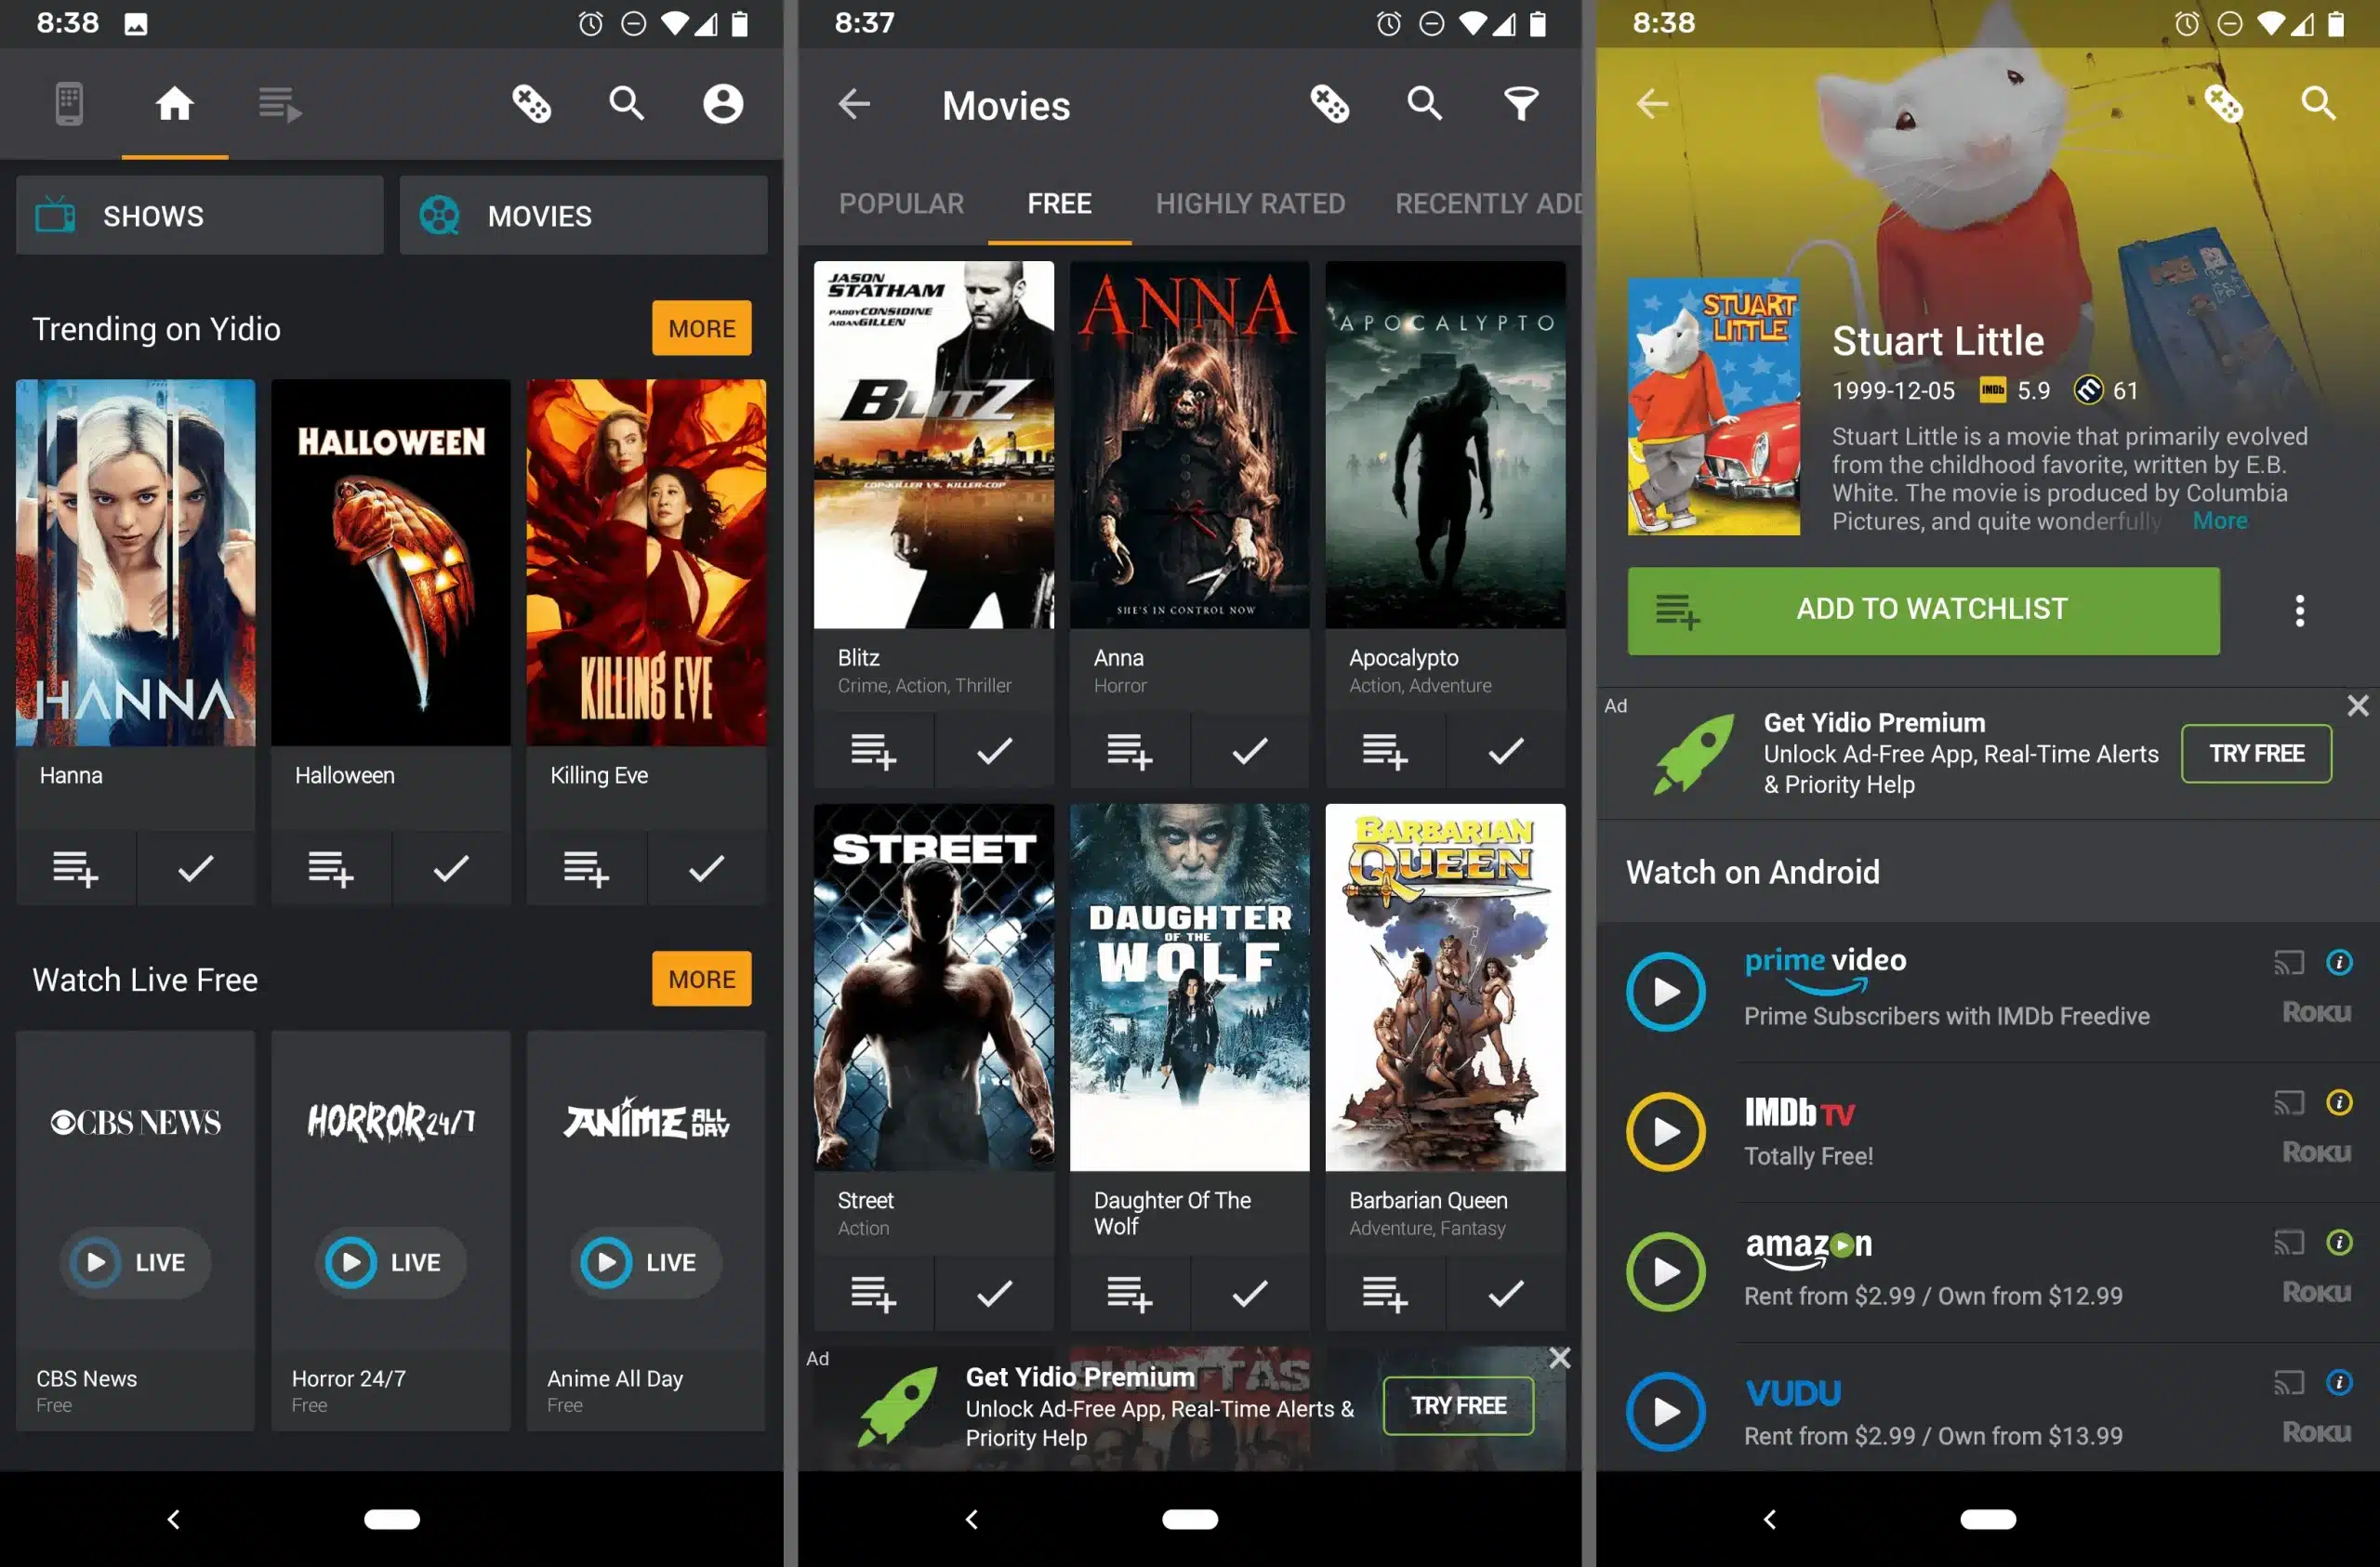 Yidio: Free Movie app for Android and iOS